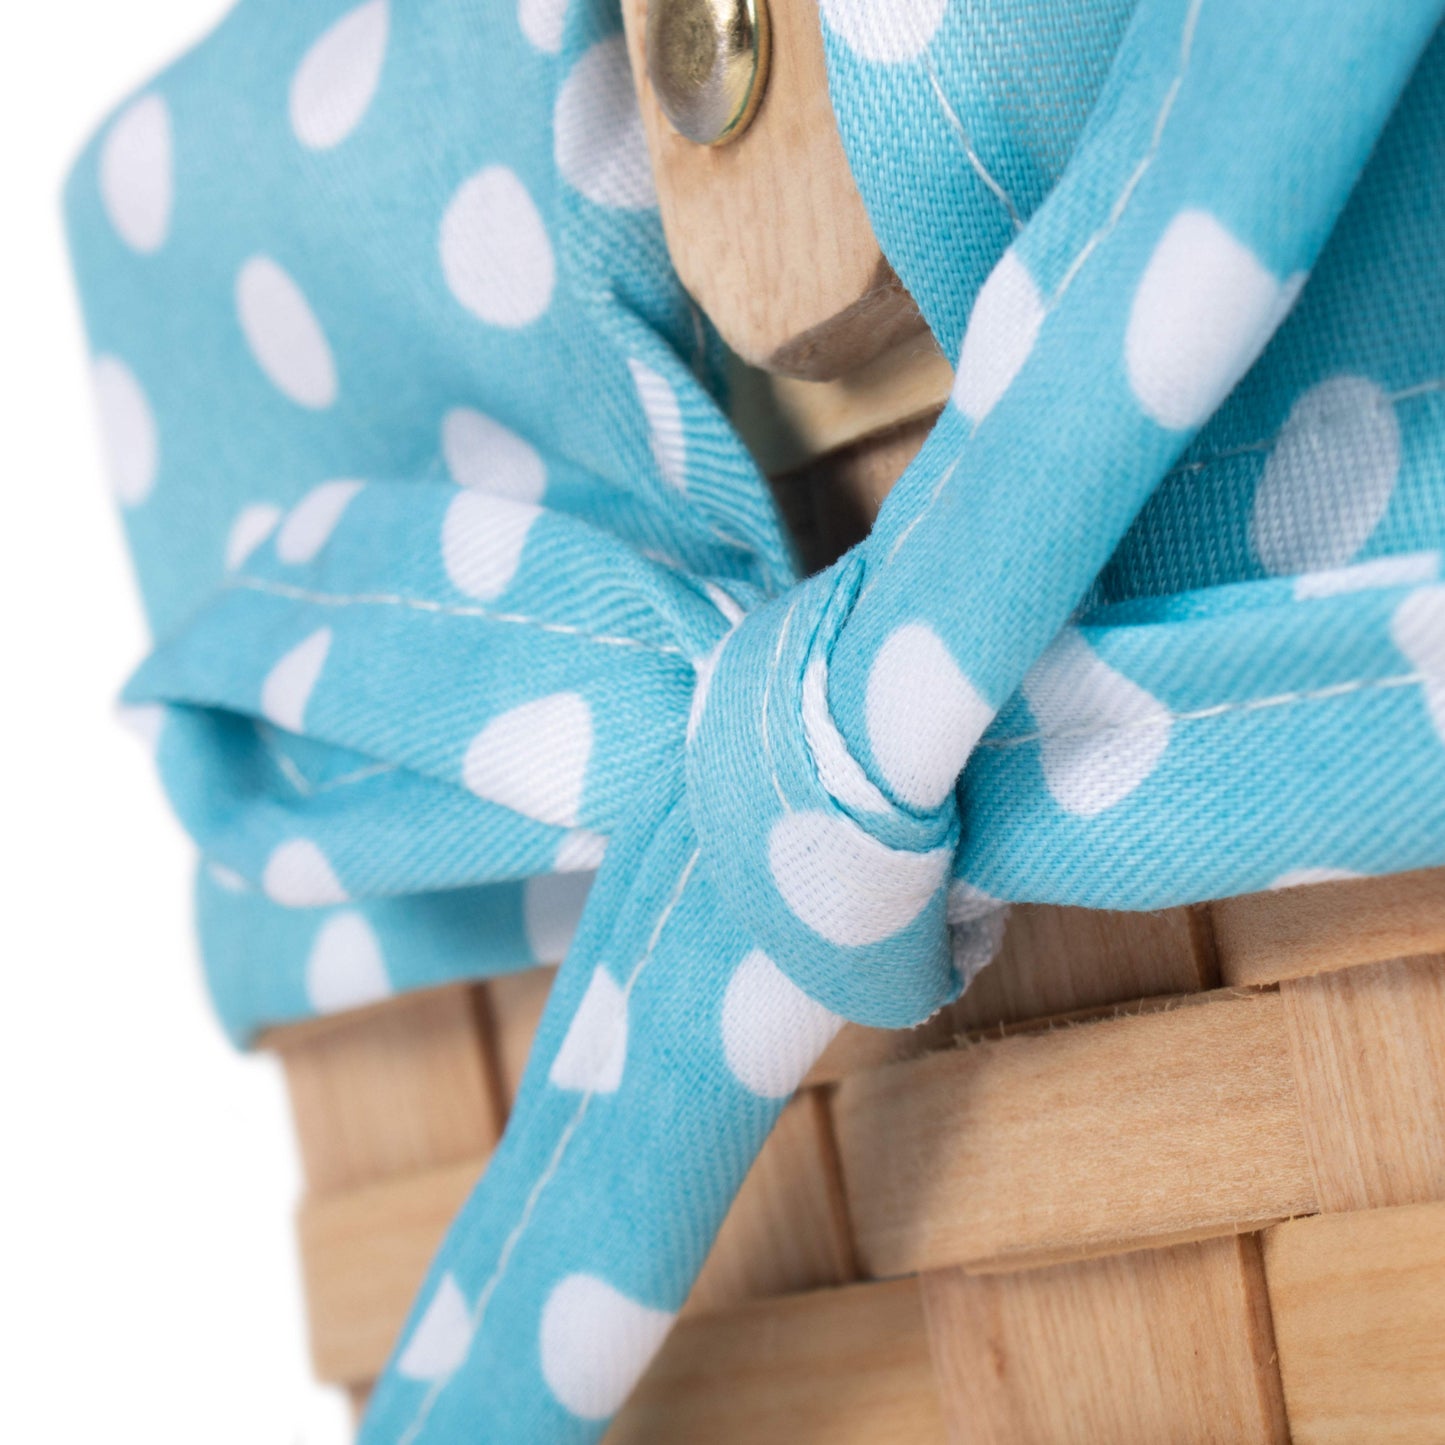 Chipwood Swing Handle Basket With Blue Lining